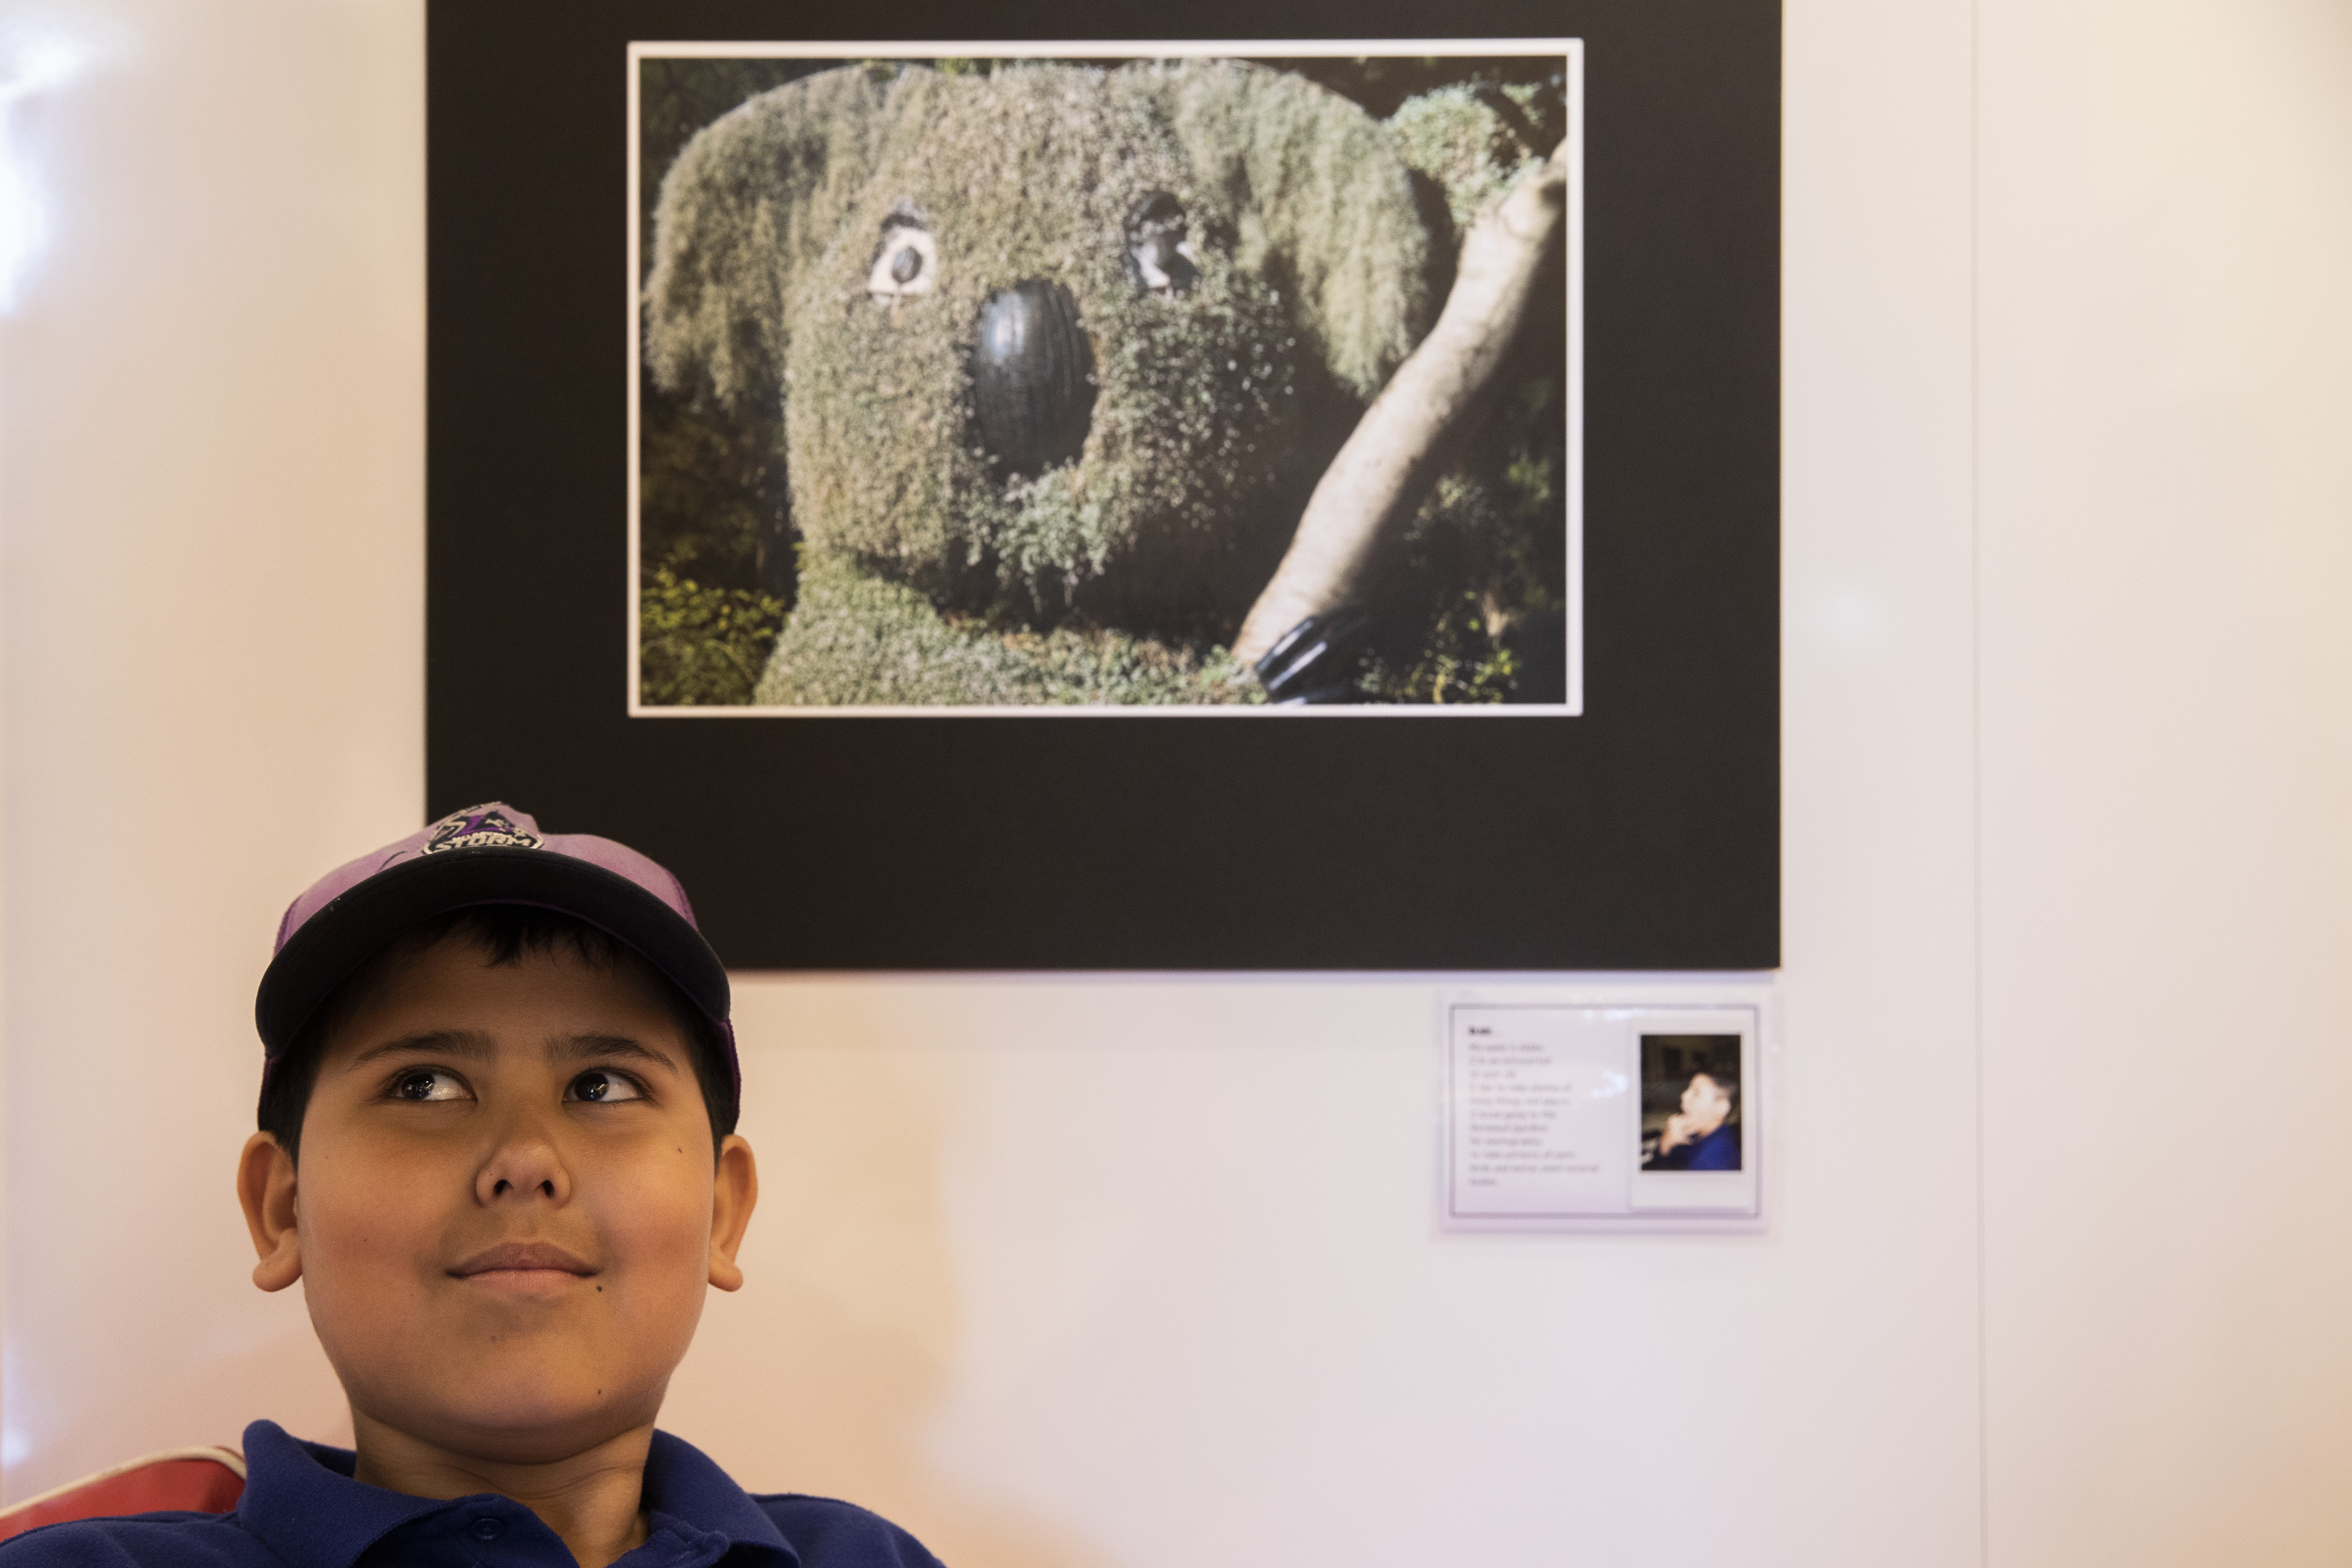 A young boy standing in front of a photograph of a koala